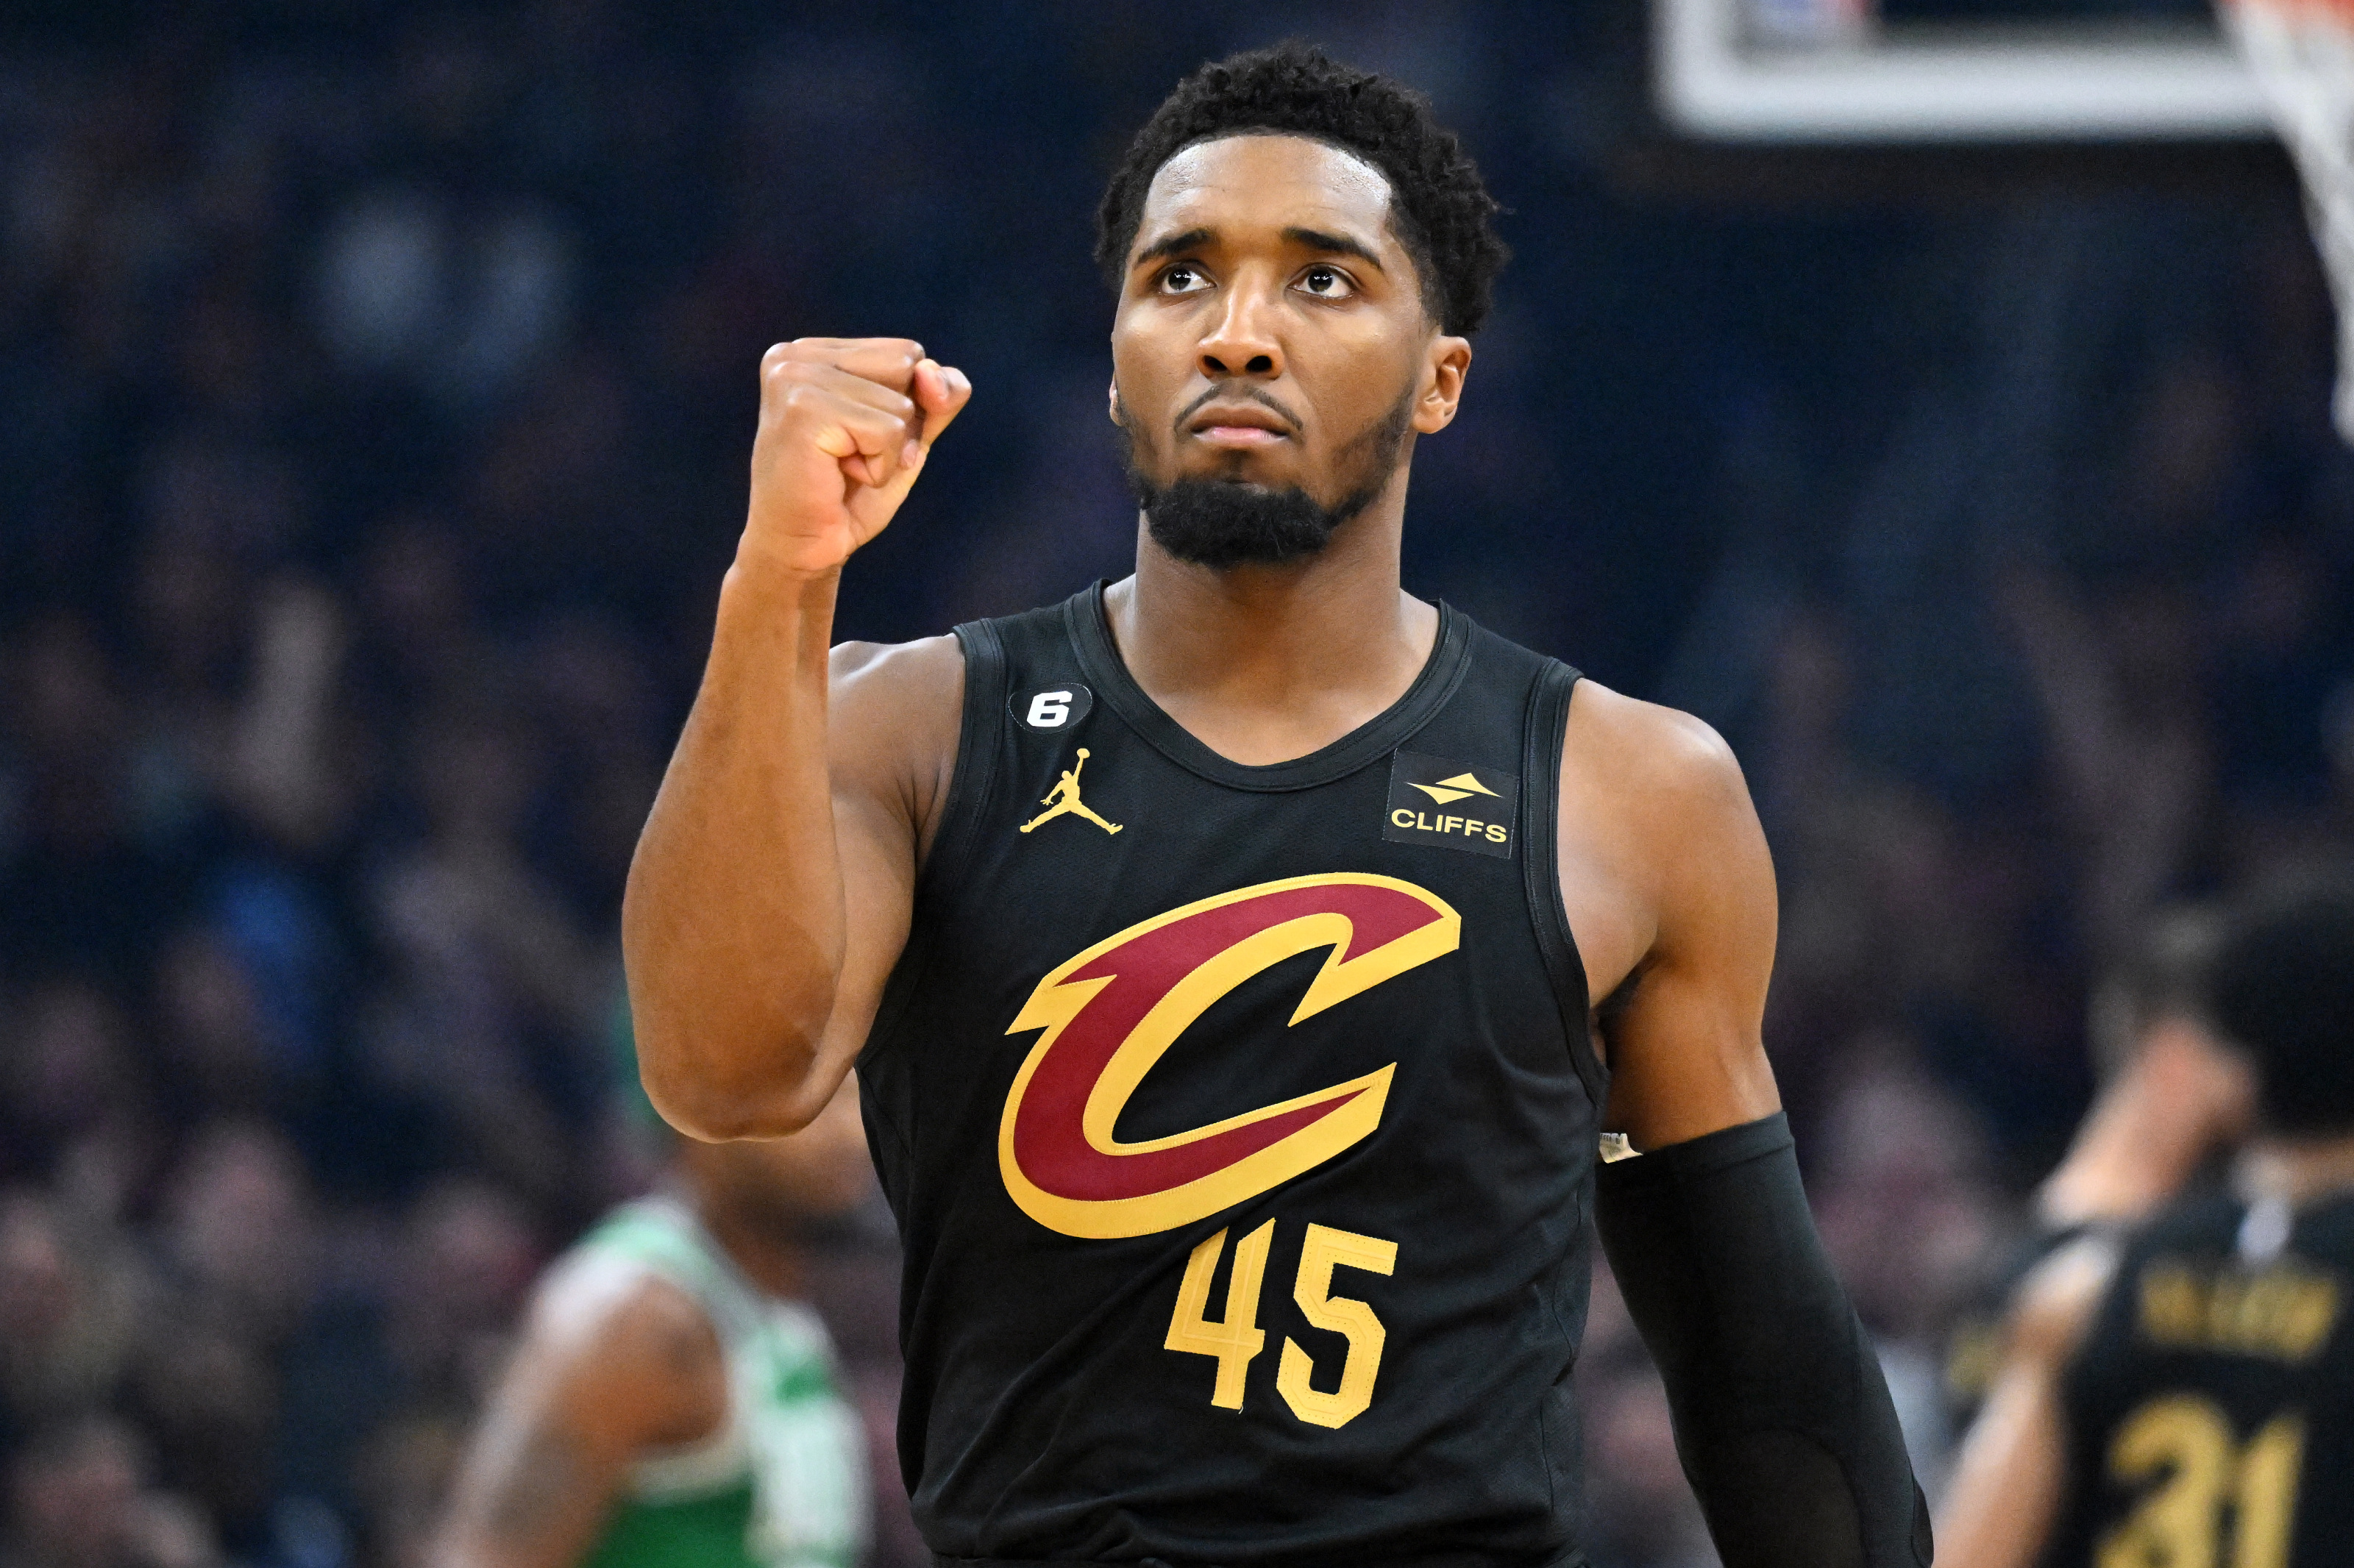 CLEVELAND CAVALIERS TRADE FOR DONOVAN MITCHELL! (New York Knicks